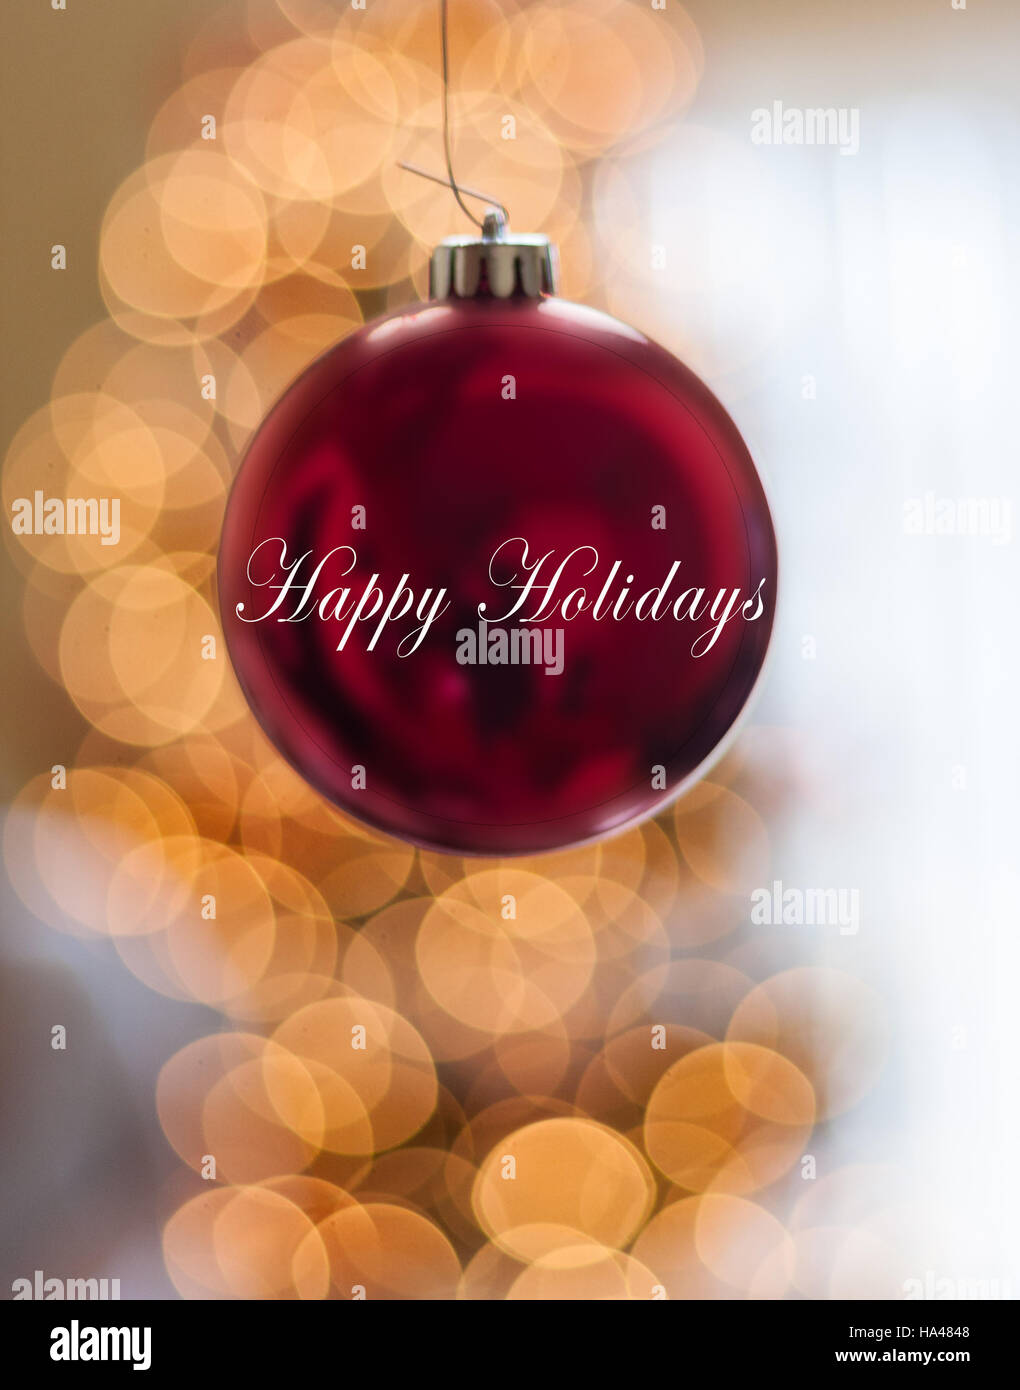 Single Red Happy Holidays Ornament hanging in front of lights Stock Photo